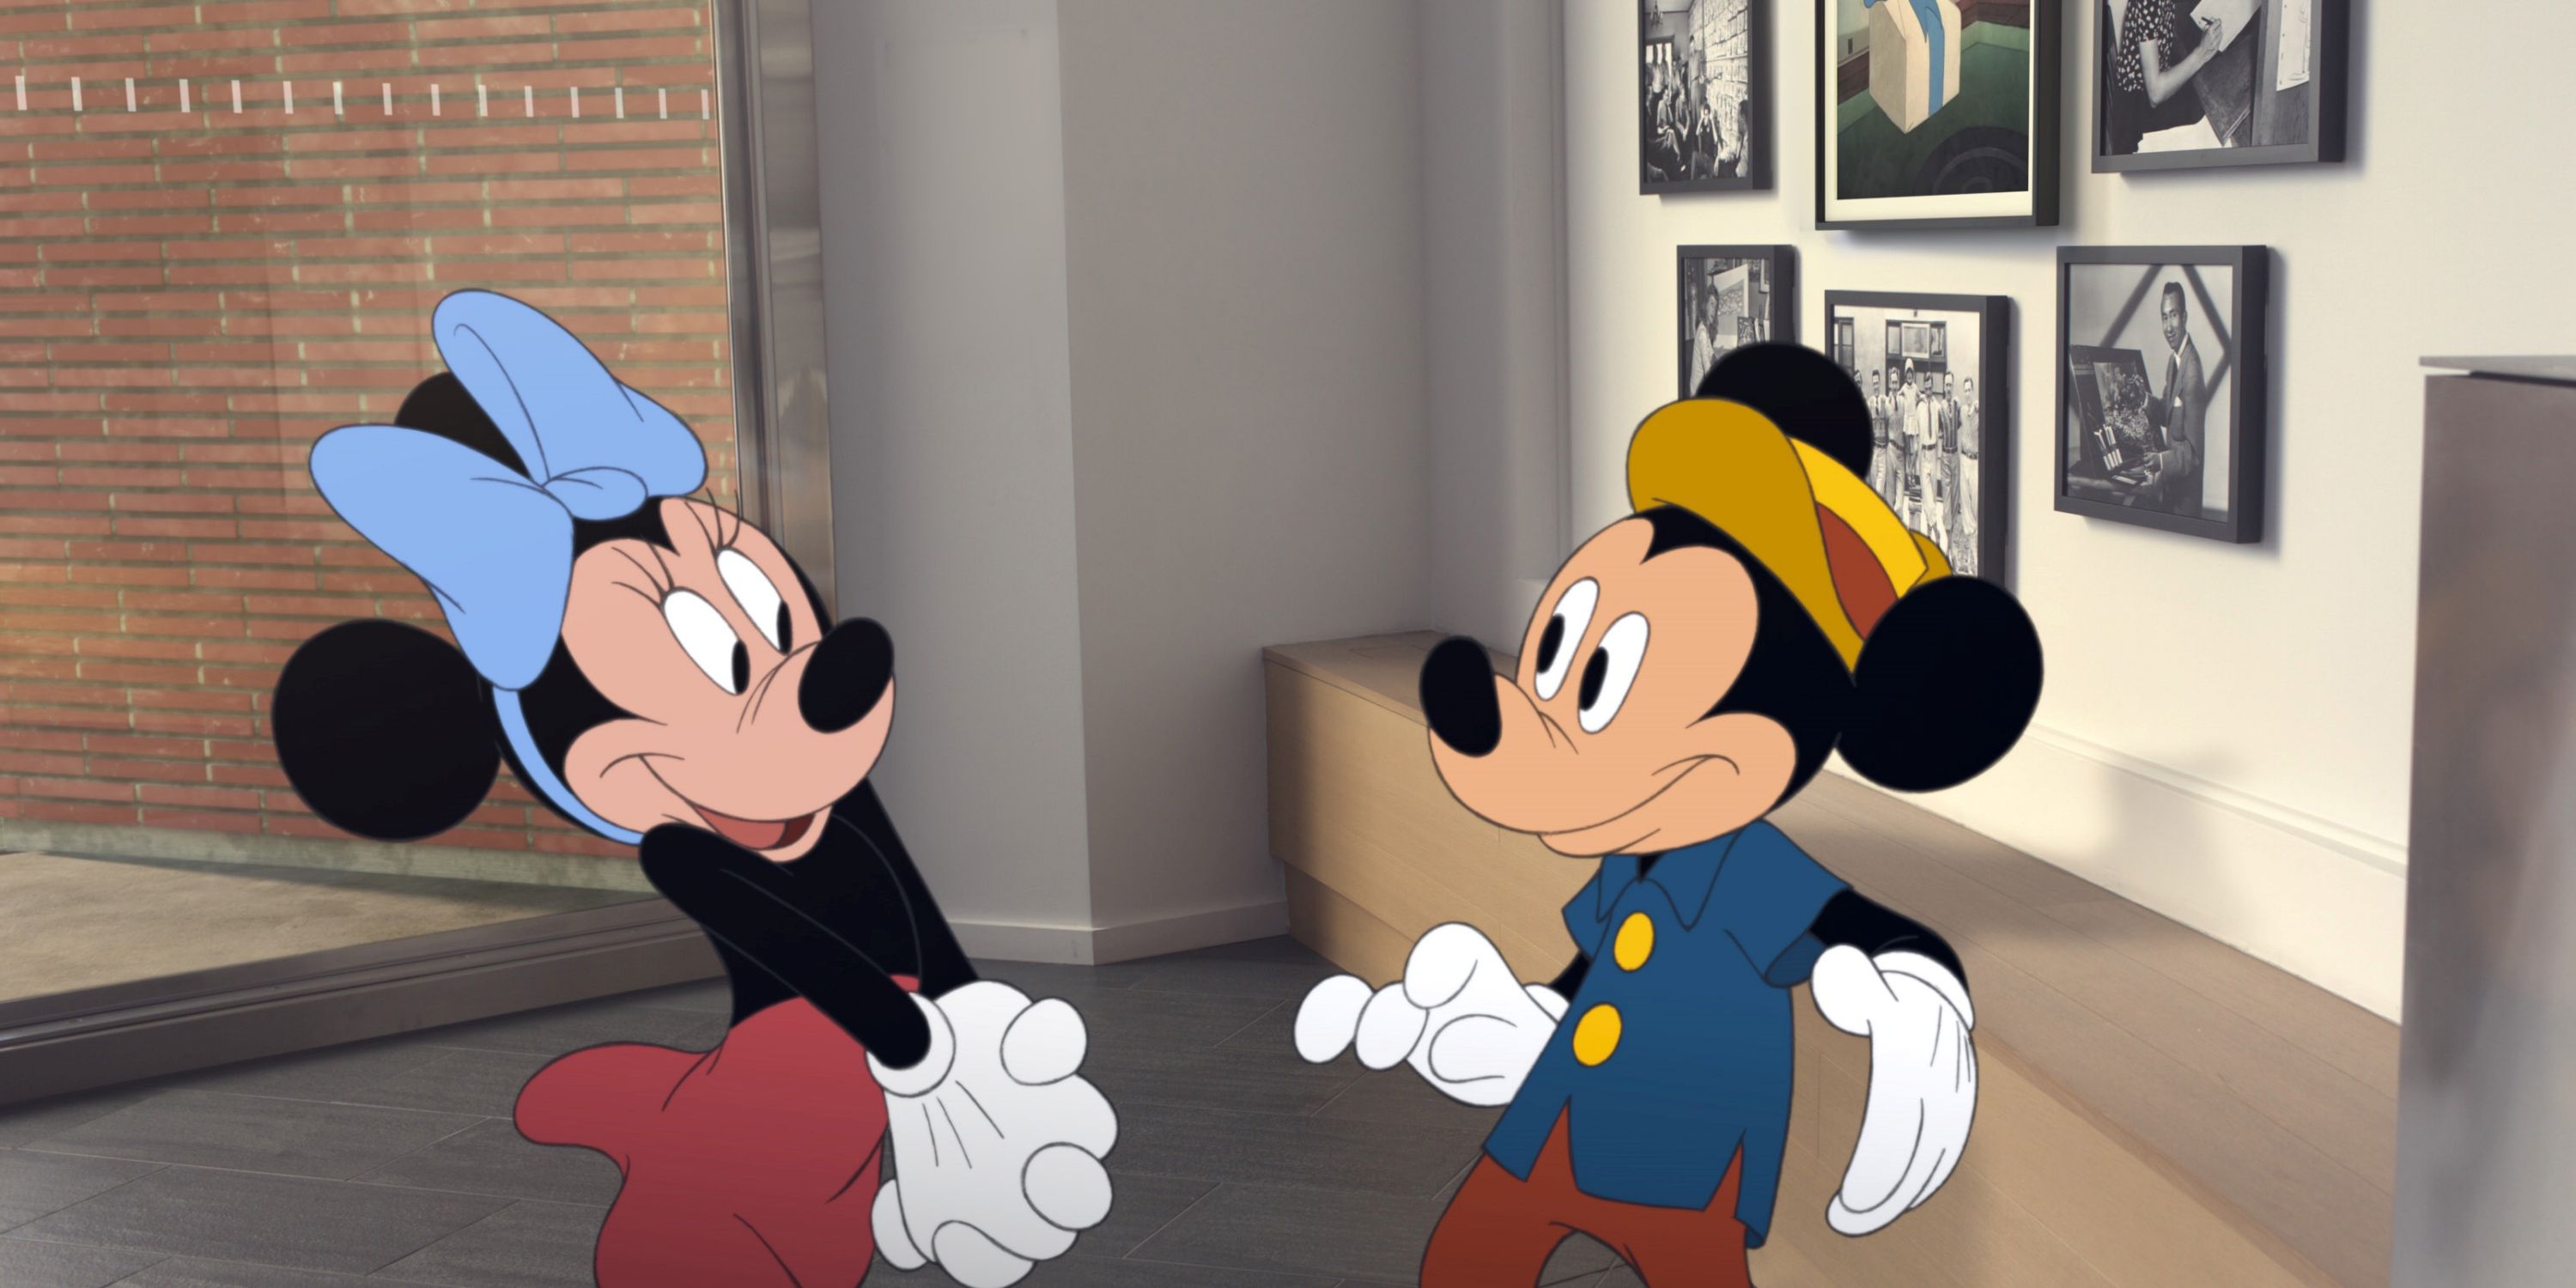 'Once Upon A Studio' Directors on Creating a Short for the Disney 100